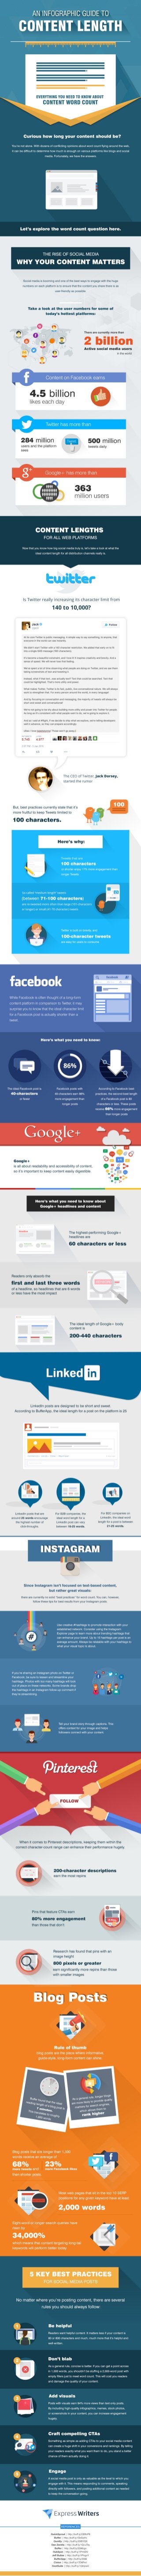 The Guide To Content Word Length (Infographic)